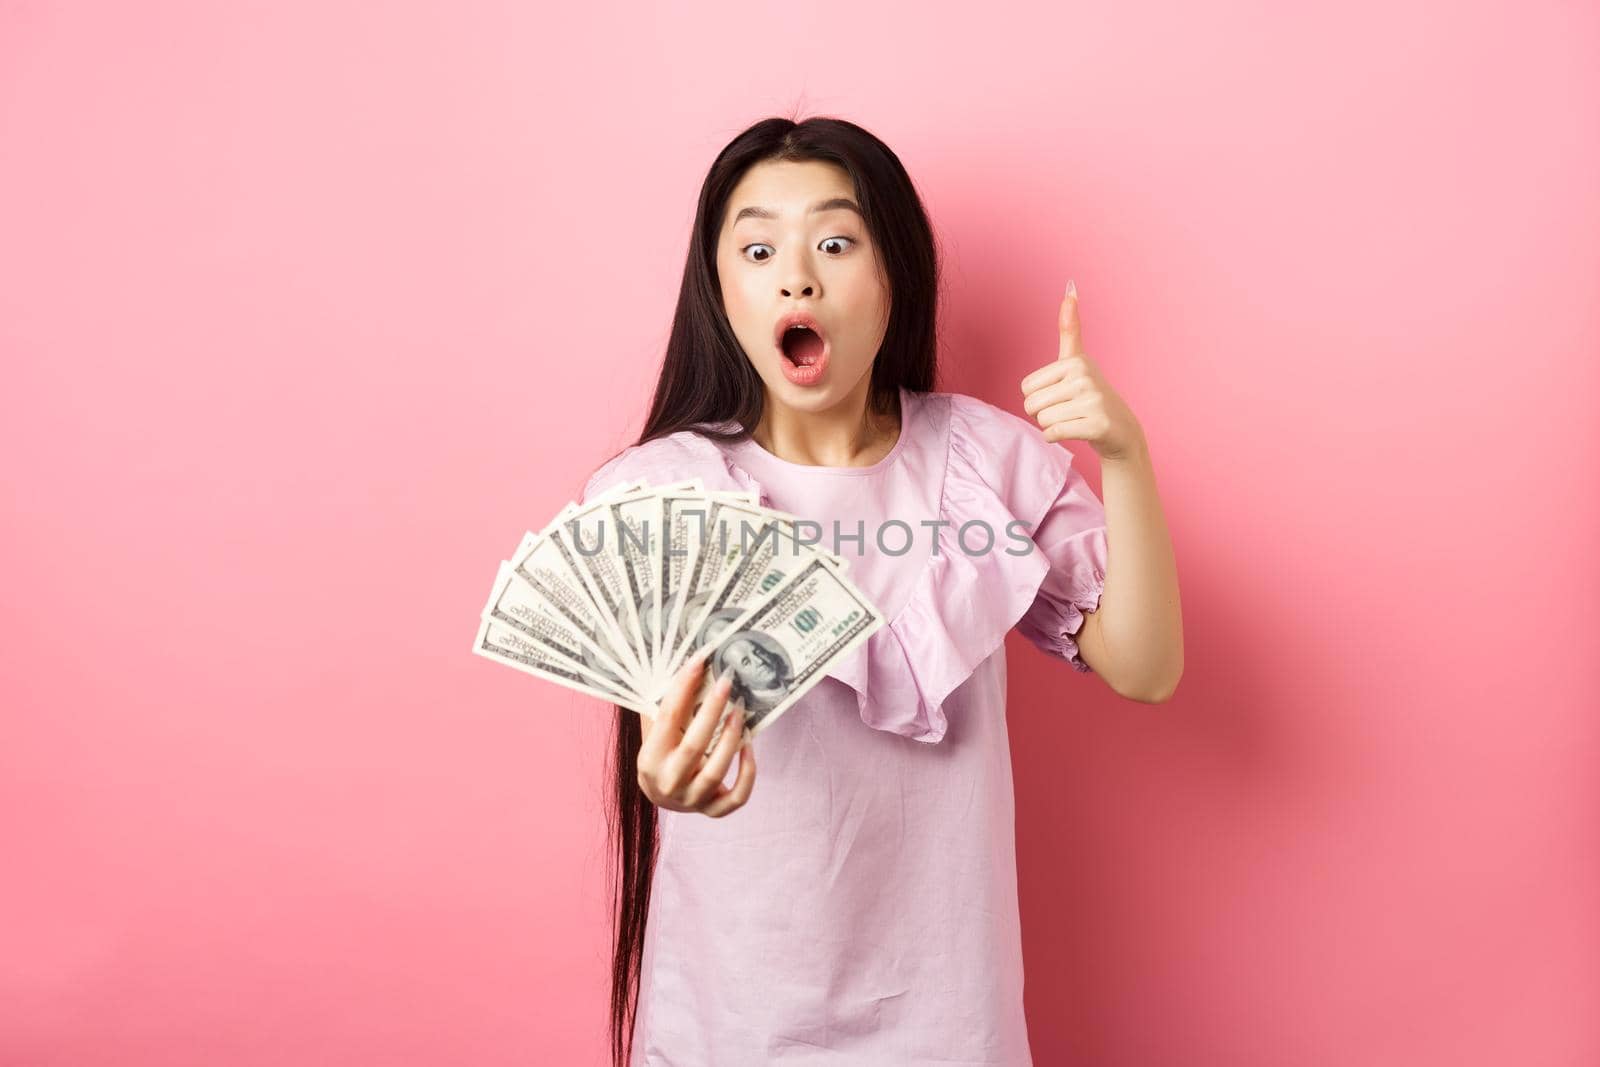 Excited teen girl holding big amount of money, showing dollar bills and thumbs up, standing amazed on pink background.